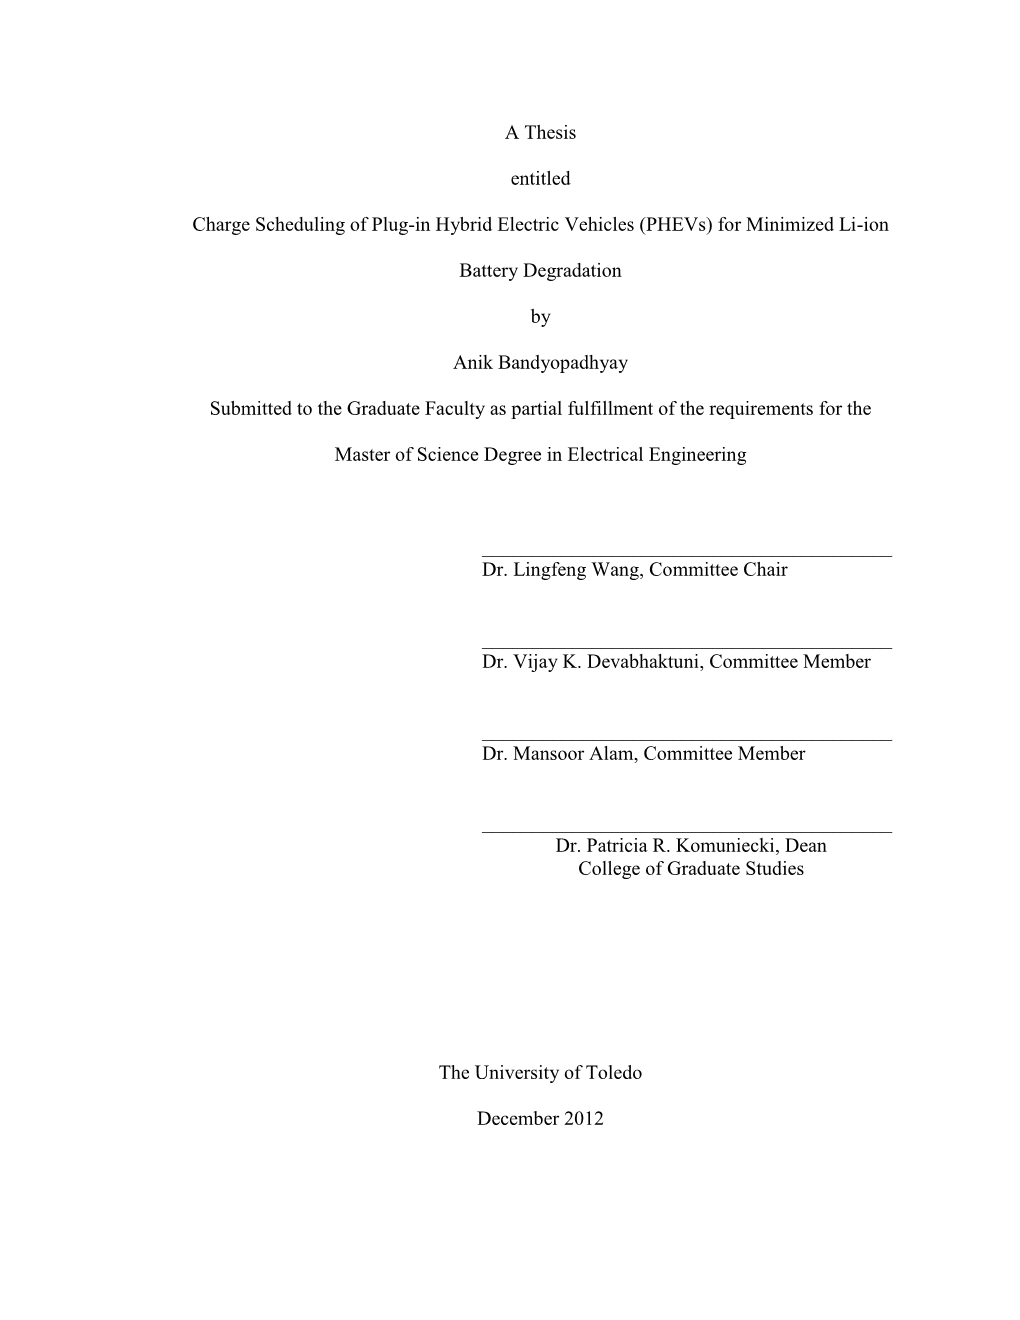 A Thesis Entitled Charge Scheduling of Plug-In Hybrid Electric Vehicles (Phevs) for Minimized Li-Ion Battery Degradation by Anik